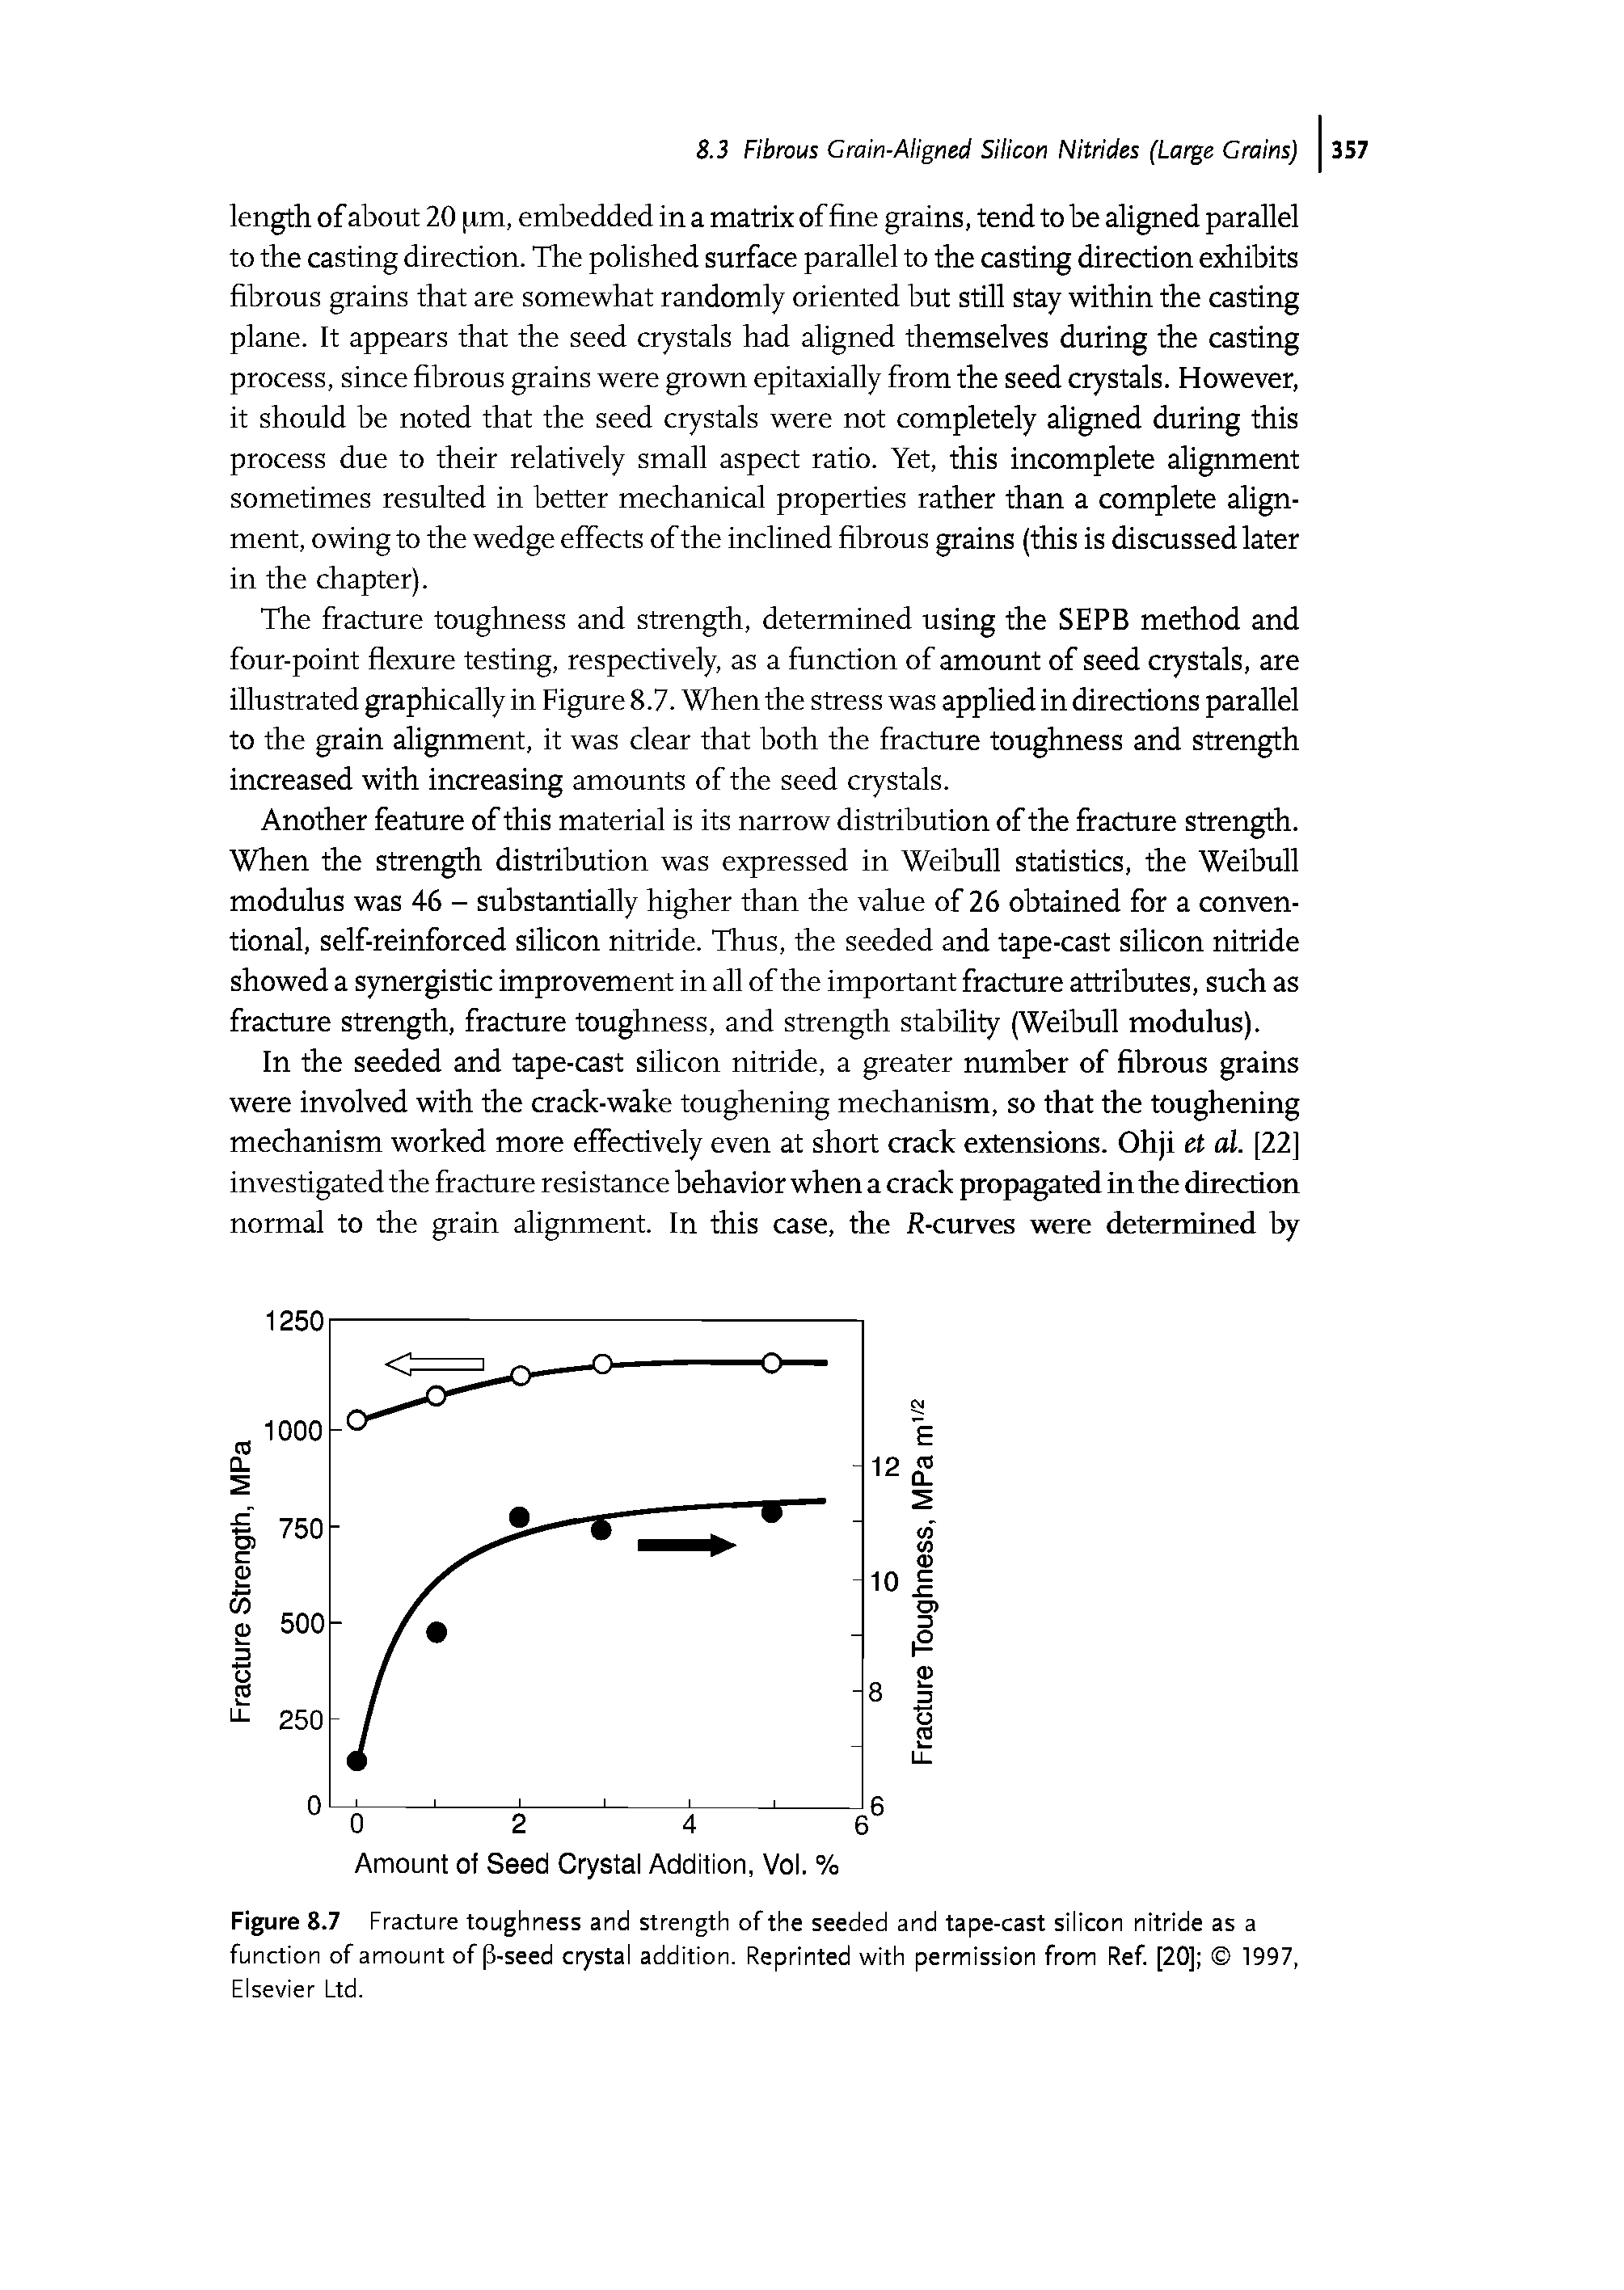 Figure 8.7 Fracture toughness and strength of the seeded and tape-cast silicon nitride as a function of amount of P-seed costal addition. Reprinted with permission from Ref. [20] 1997, Elsevier Ltd.